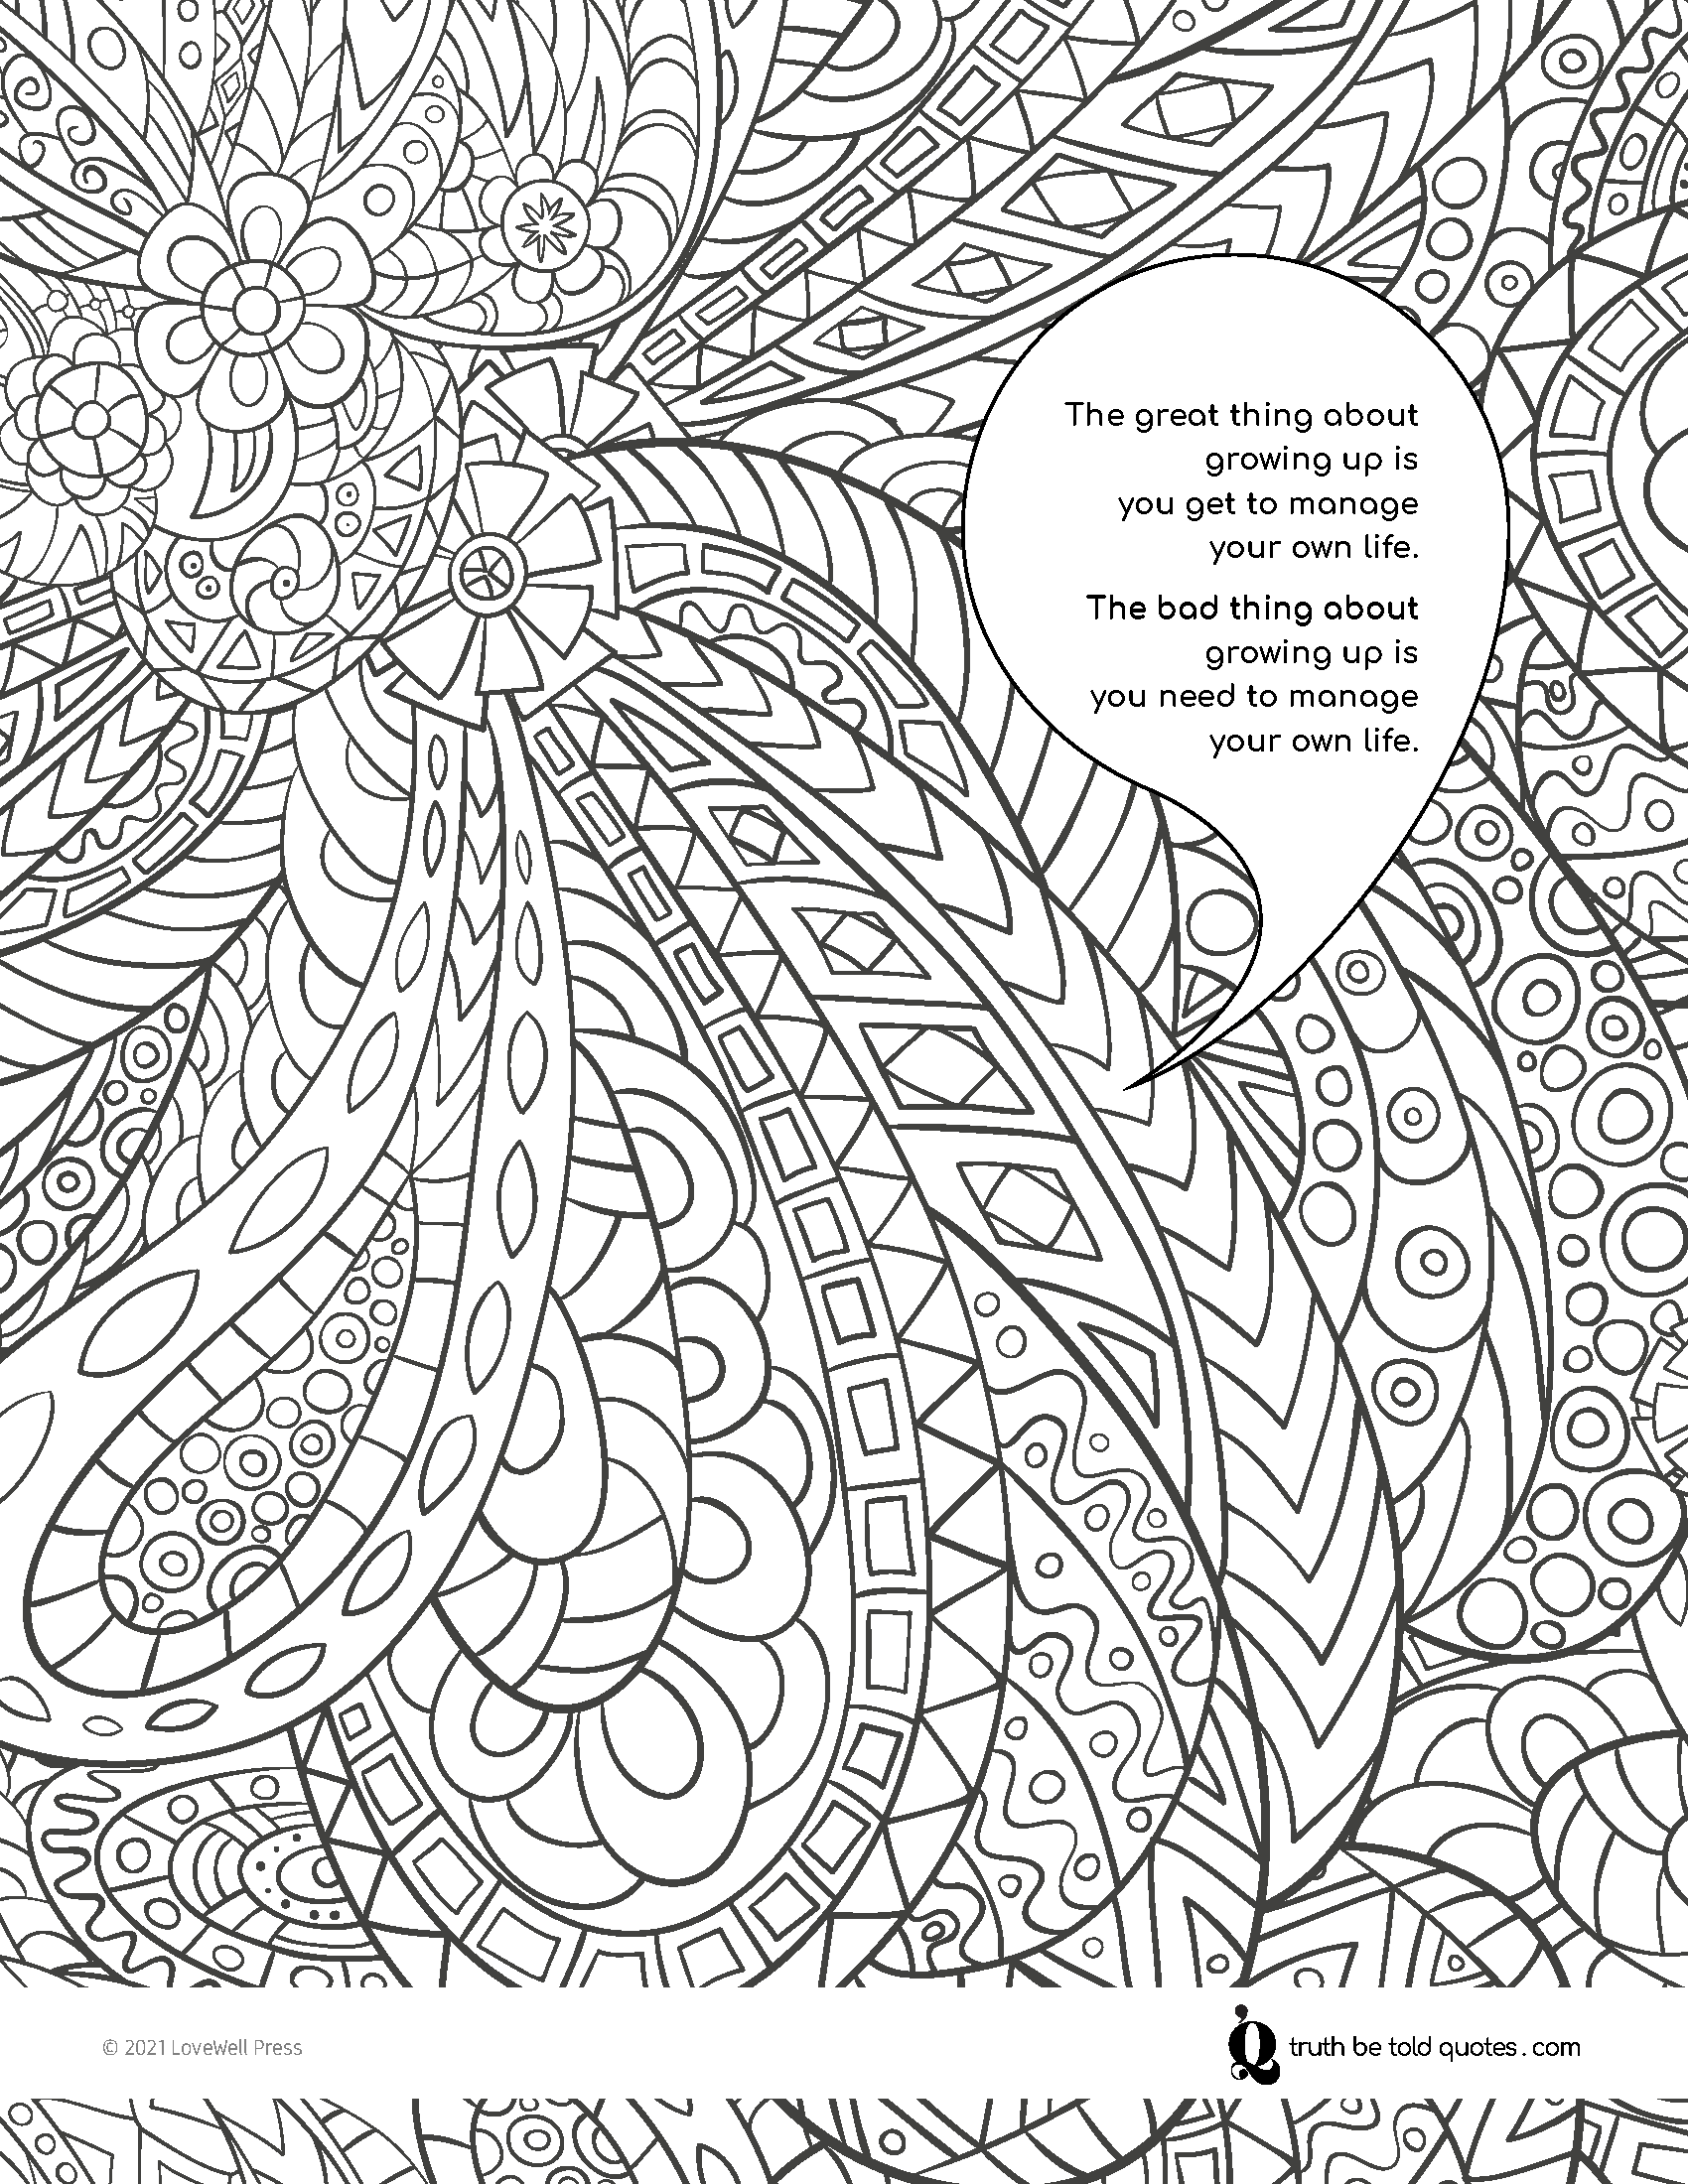 Free coloring page with quote about growing up with responsibility with image of zentangle style petals